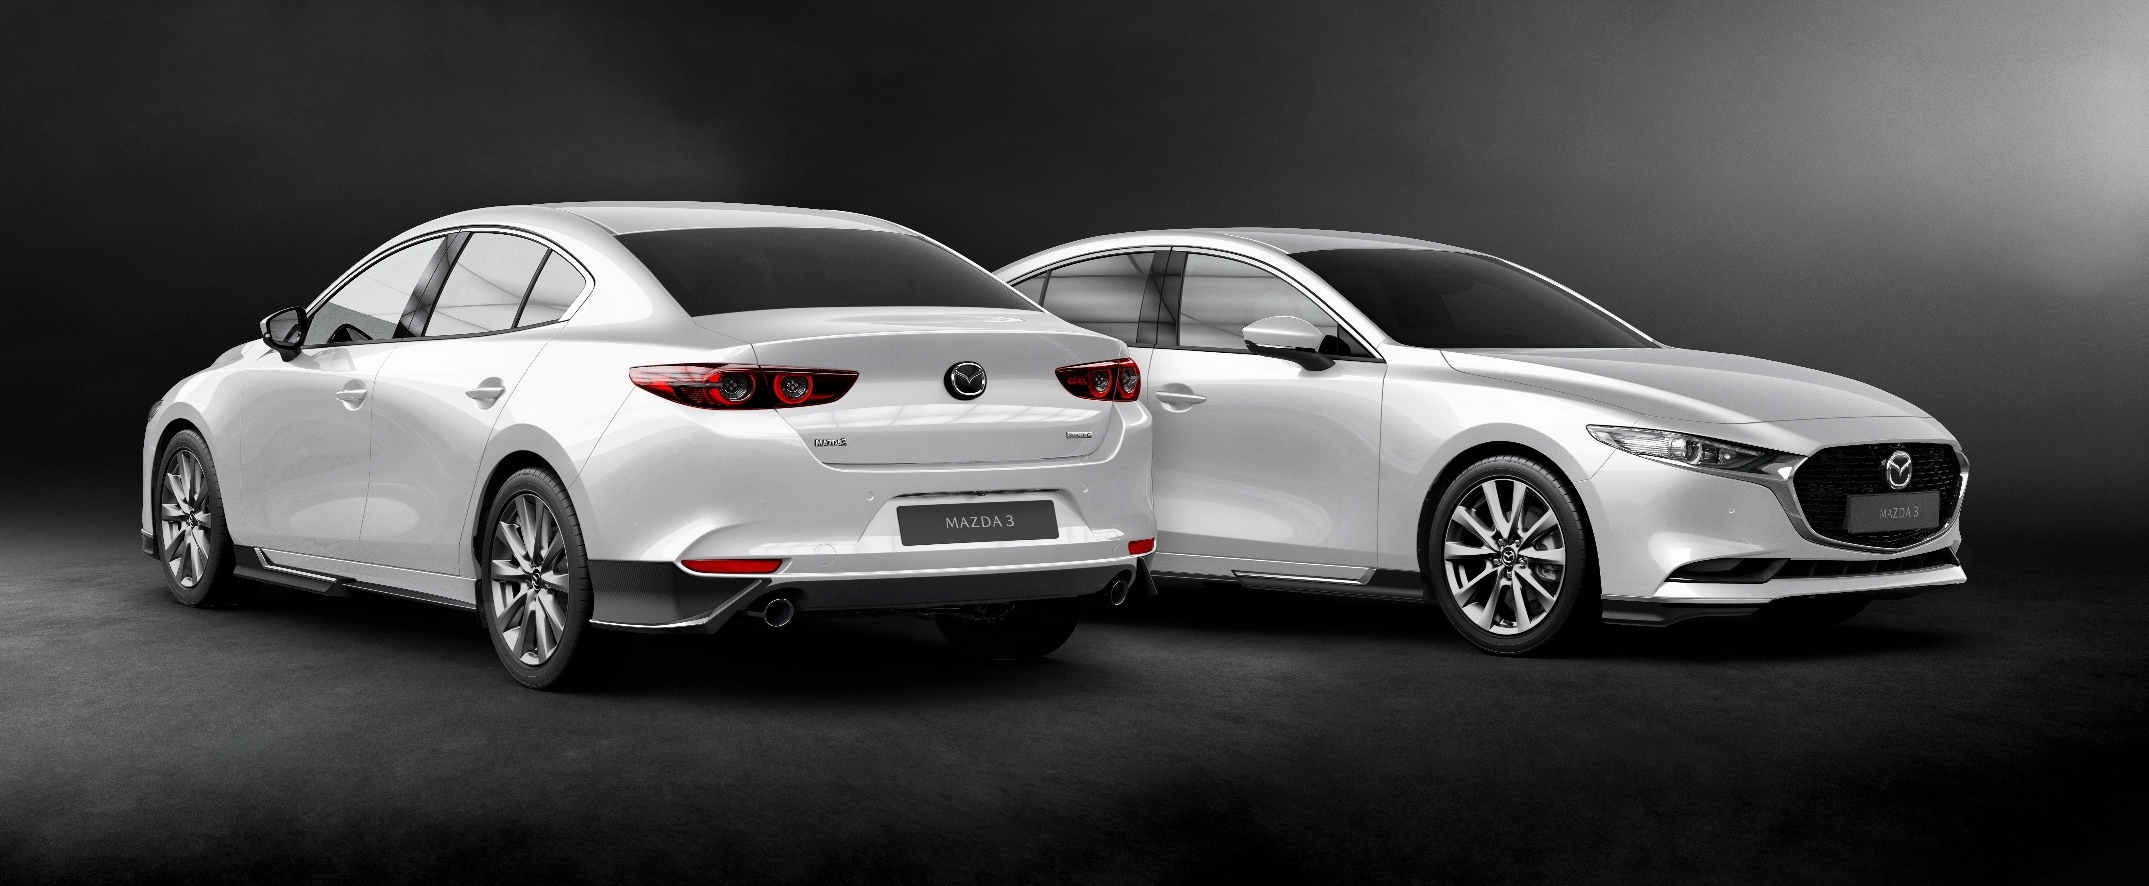 Mazda sales figure continues to increase, reflecting market recovery, unveils genuine KENSHO accessories for Mazda3